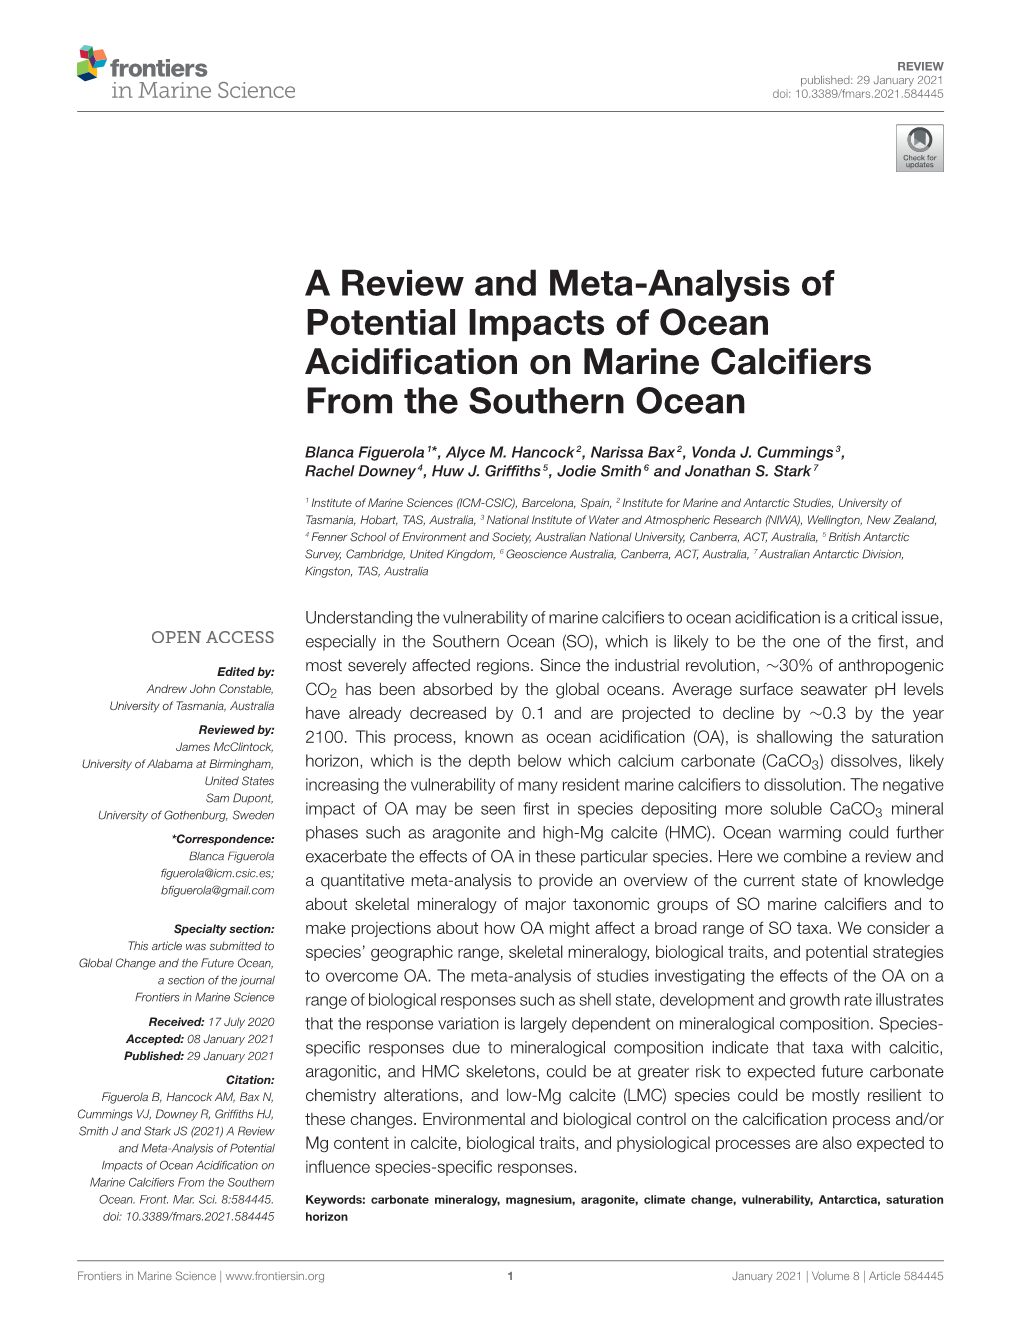 A Review and Meta-Analysis of Potential Impacts of Ocean Acidiﬁcation on Marine Calciﬁers from the Southern Ocean